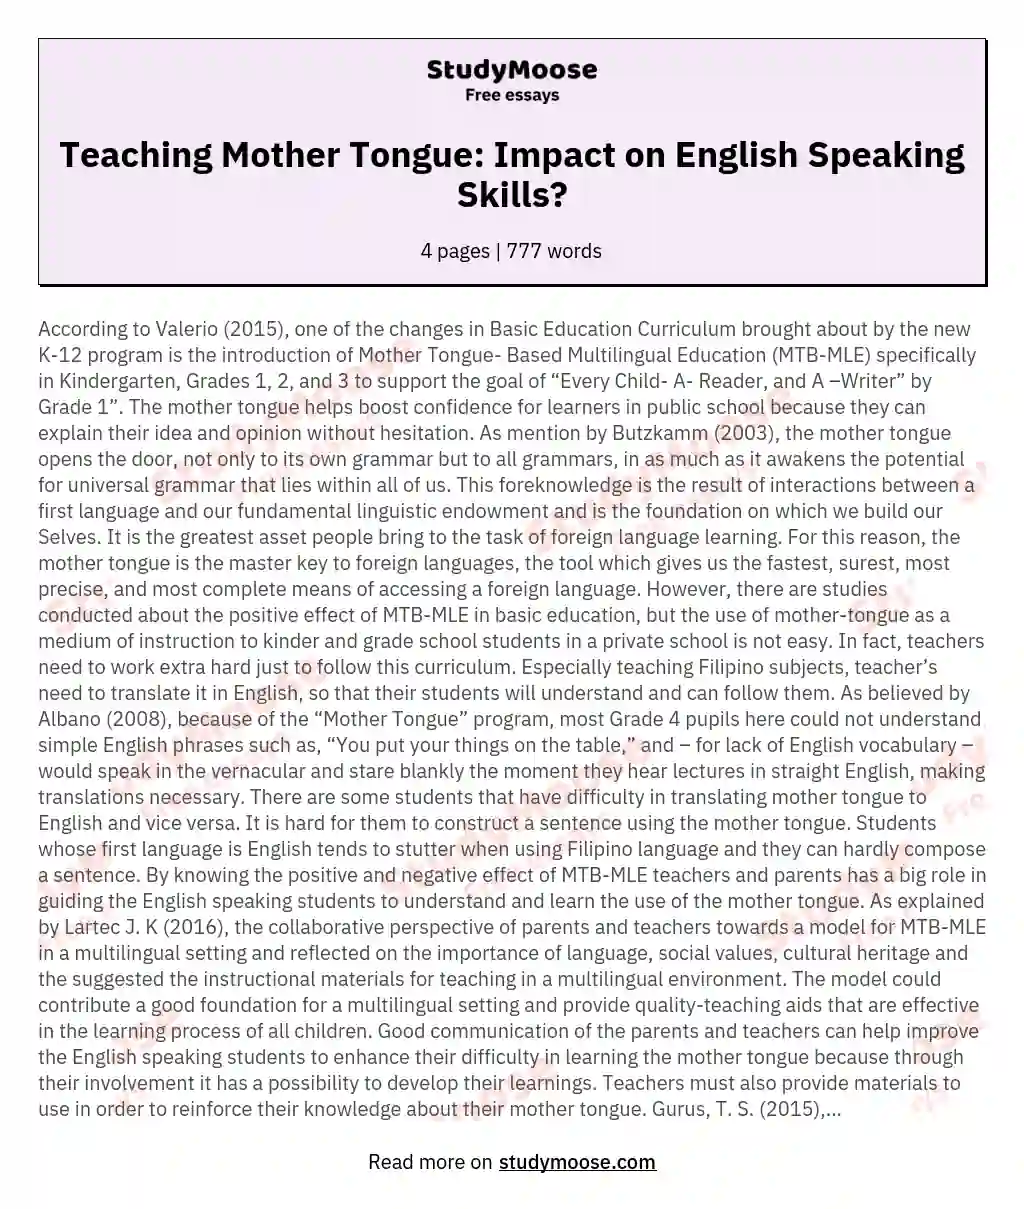 The Effects of Teaching the Mother Tongue to the English Speaking Skills of Learners